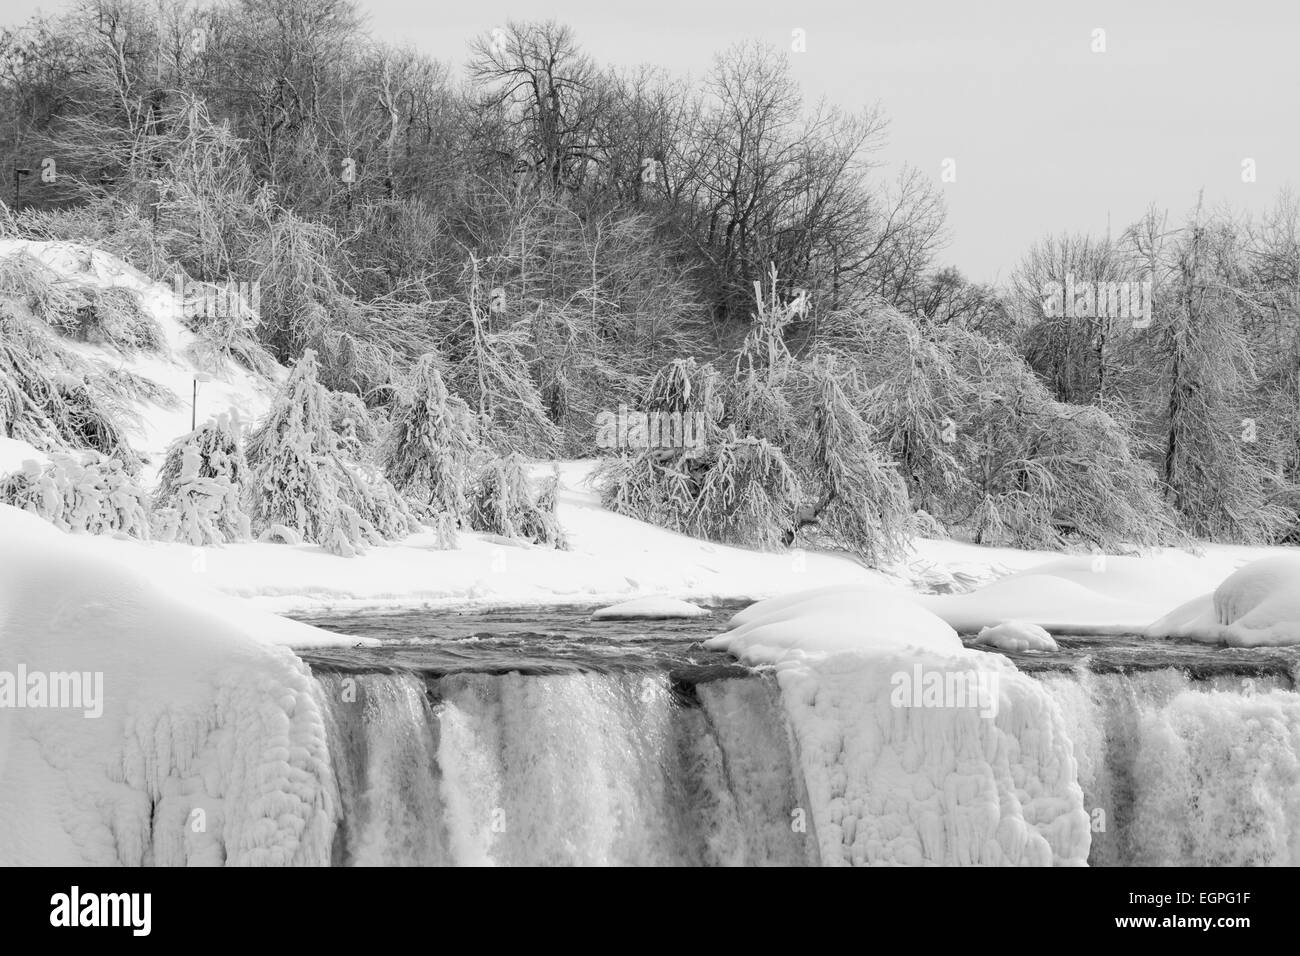 American falls frozen in winter during harsh winter months Stock Photo